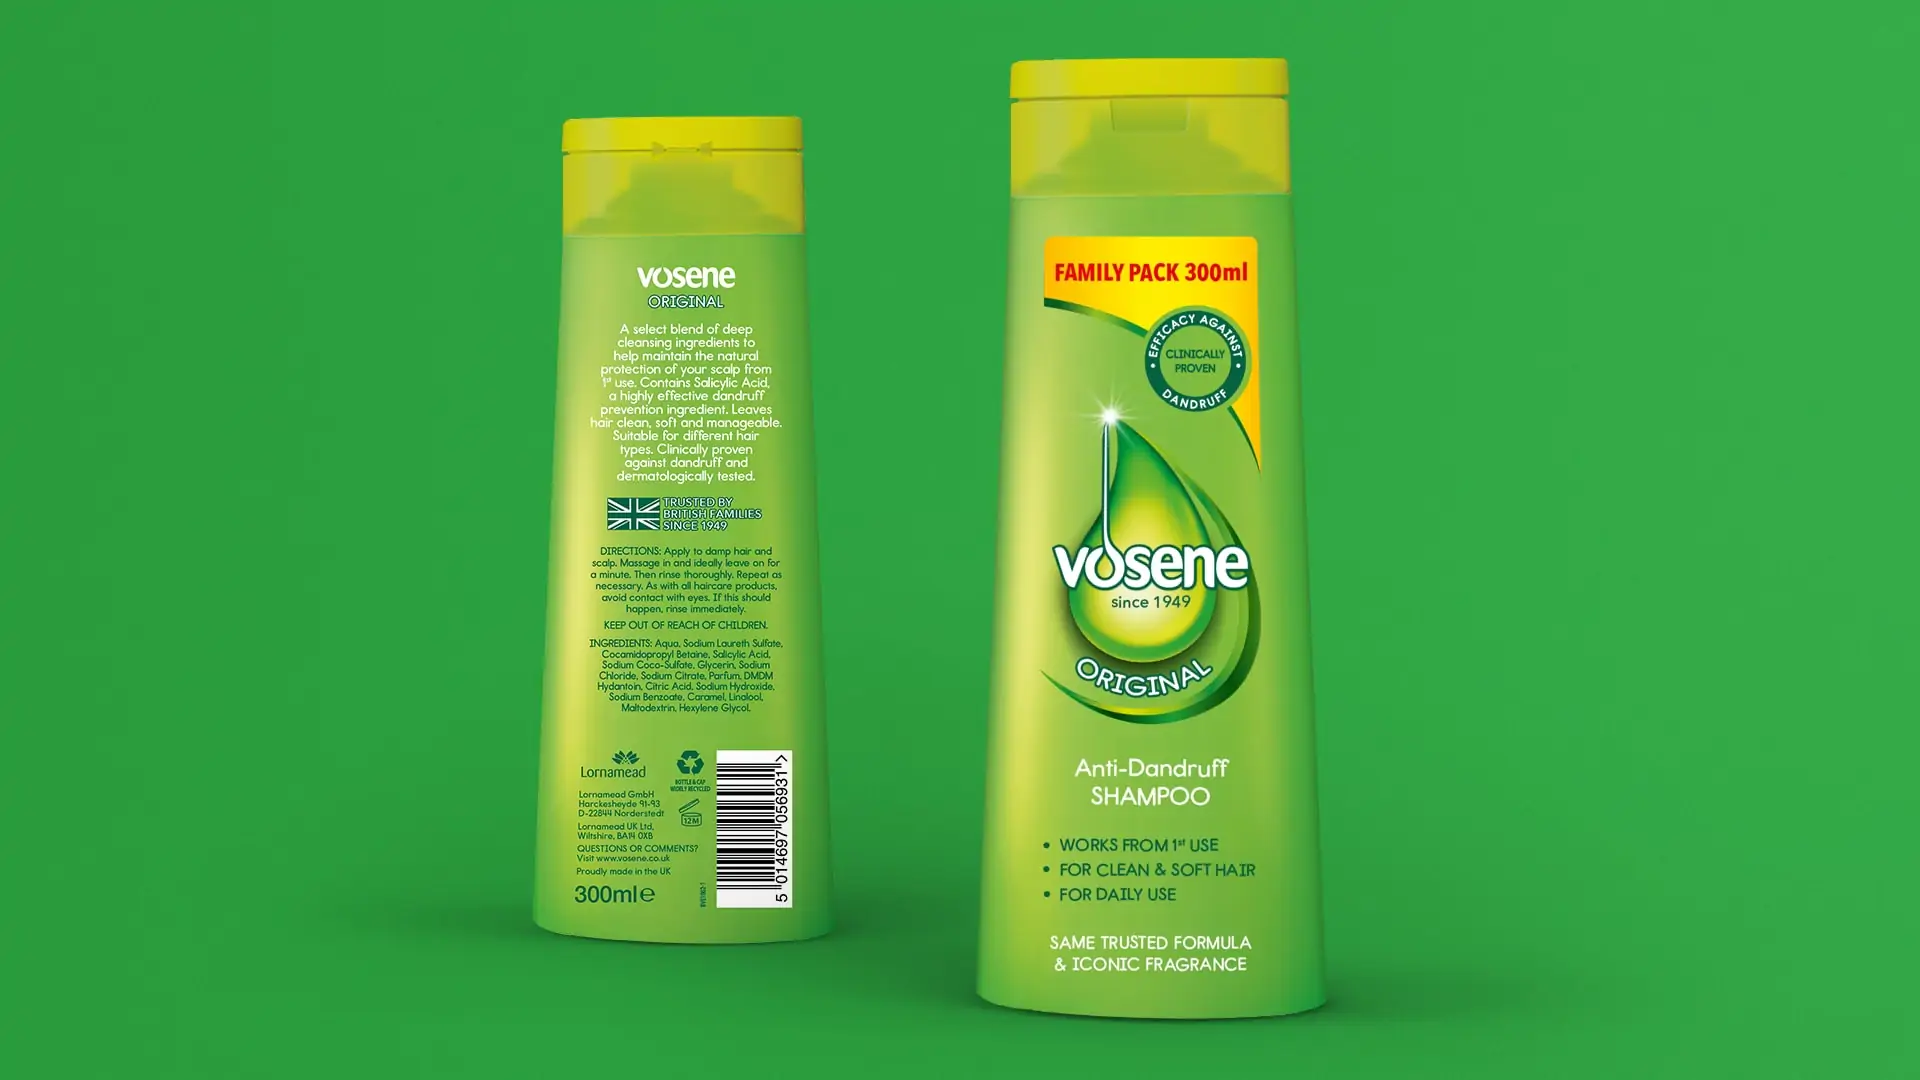 vosene branding and packaging design front and back